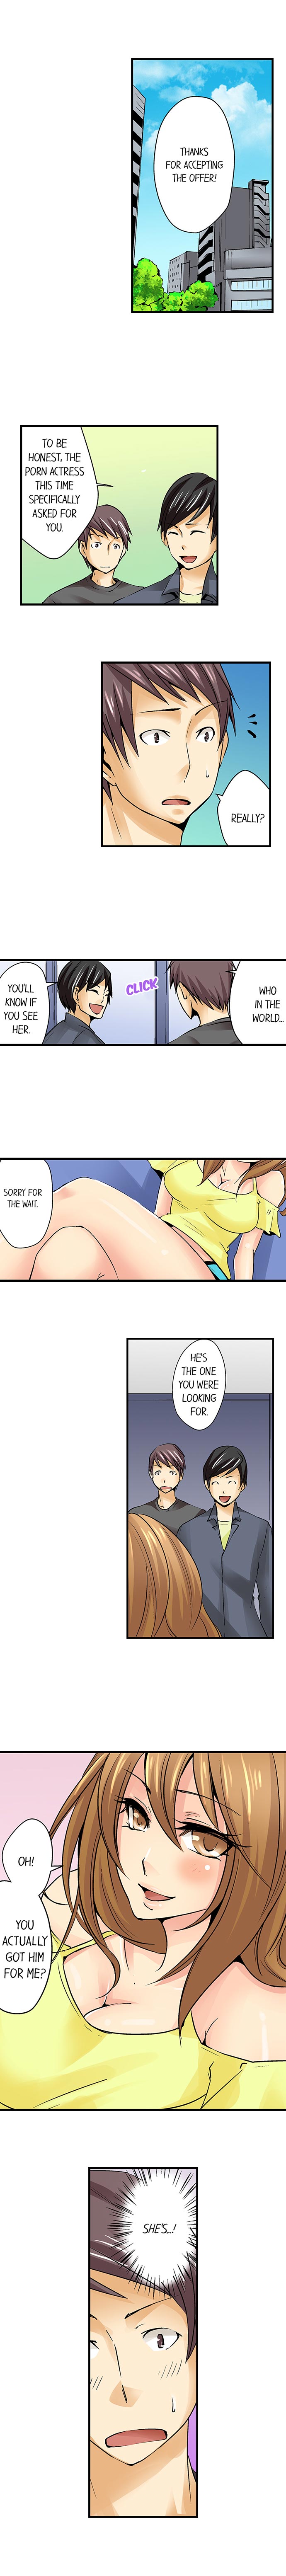 Porn Actor Debut...With My Childhood Friend!? - Chapter 7 Page 2